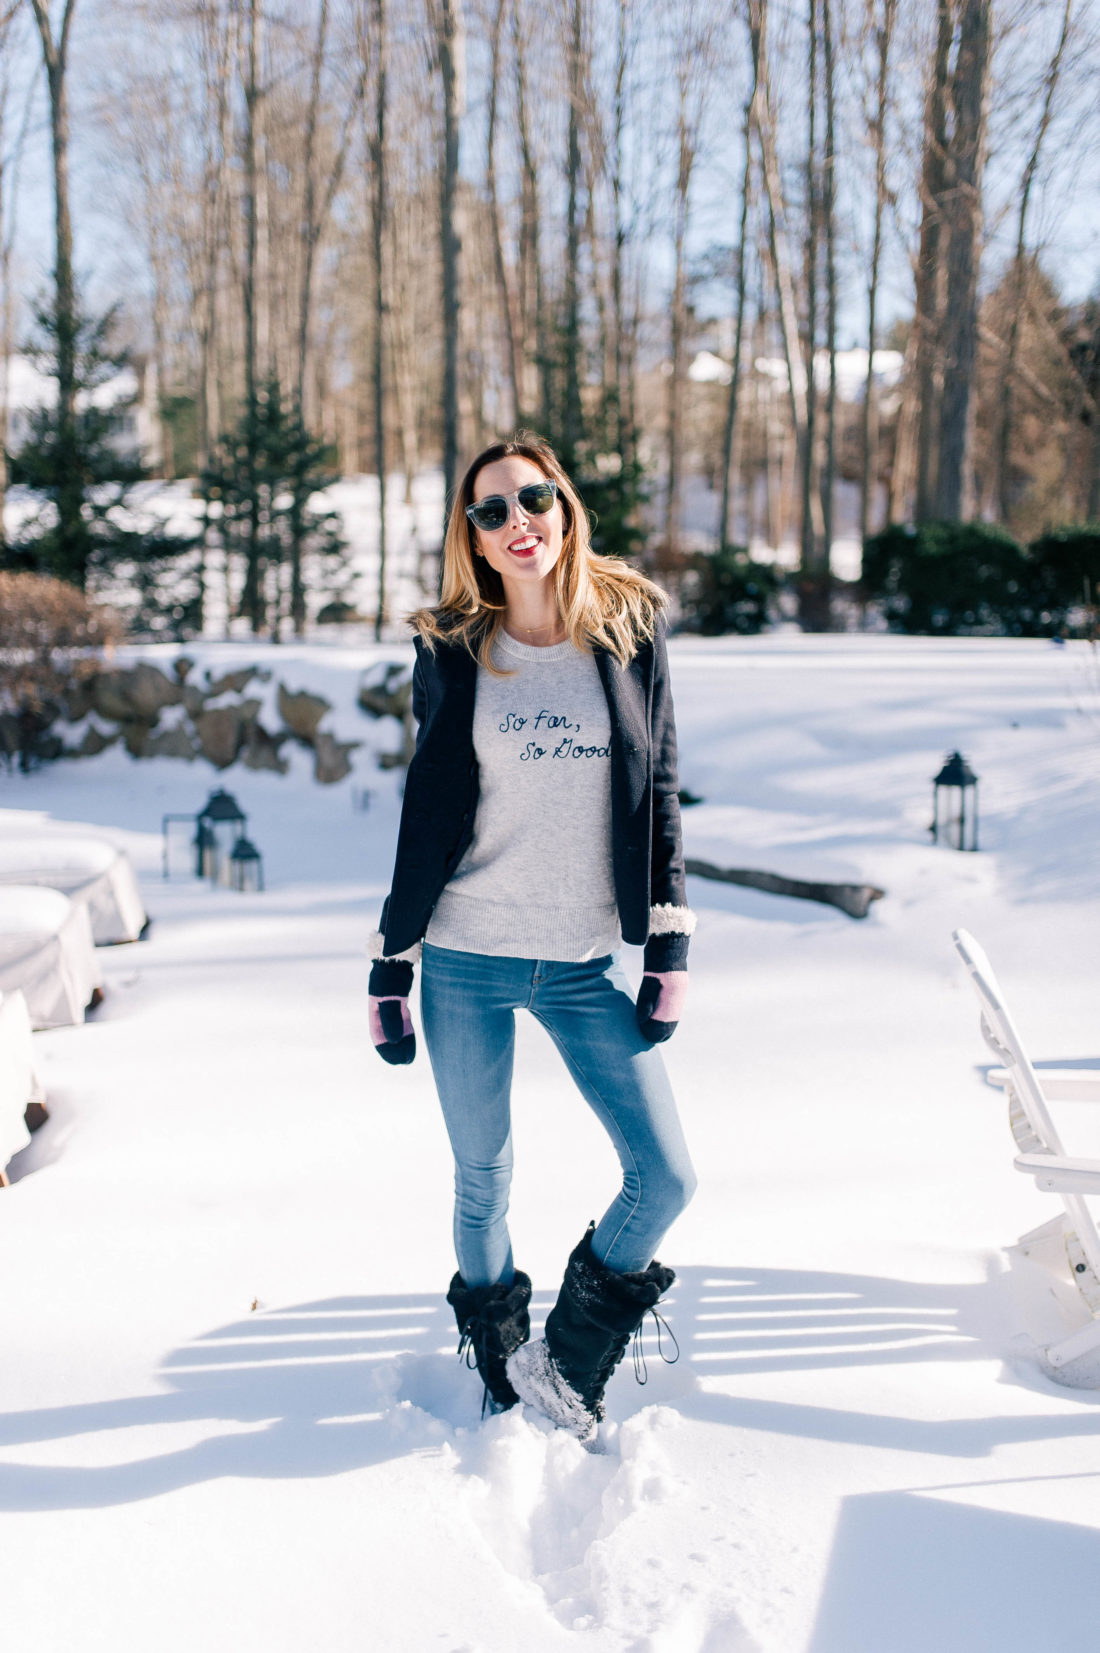 Eva Amurri Martino wears old navy jeans, black snow boots, a grey sweater and pea coat and stands in the snow outside her Connecticut home